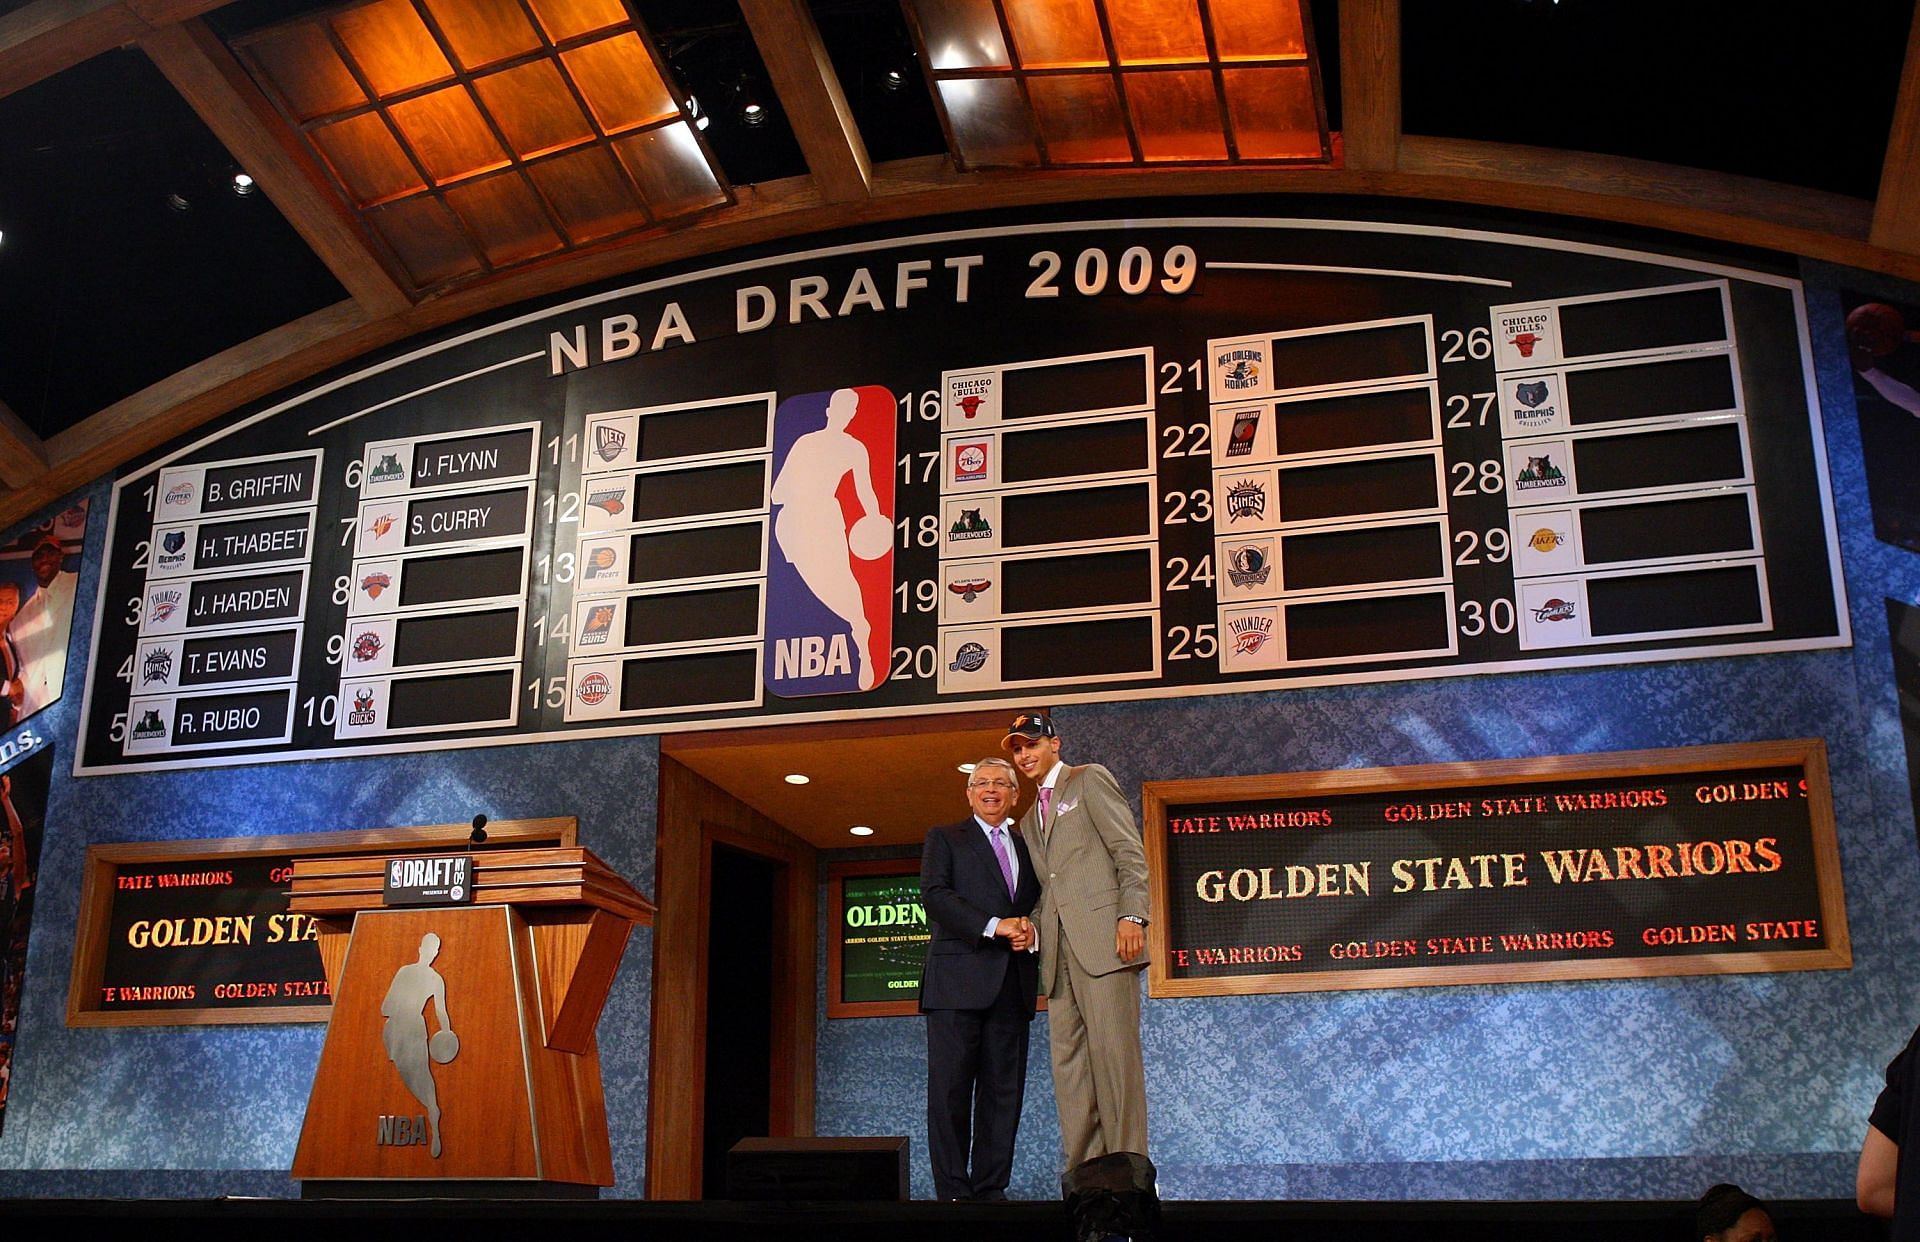 Stephen Curry was chosen with the seventh pick, one ahead of the Knicks.